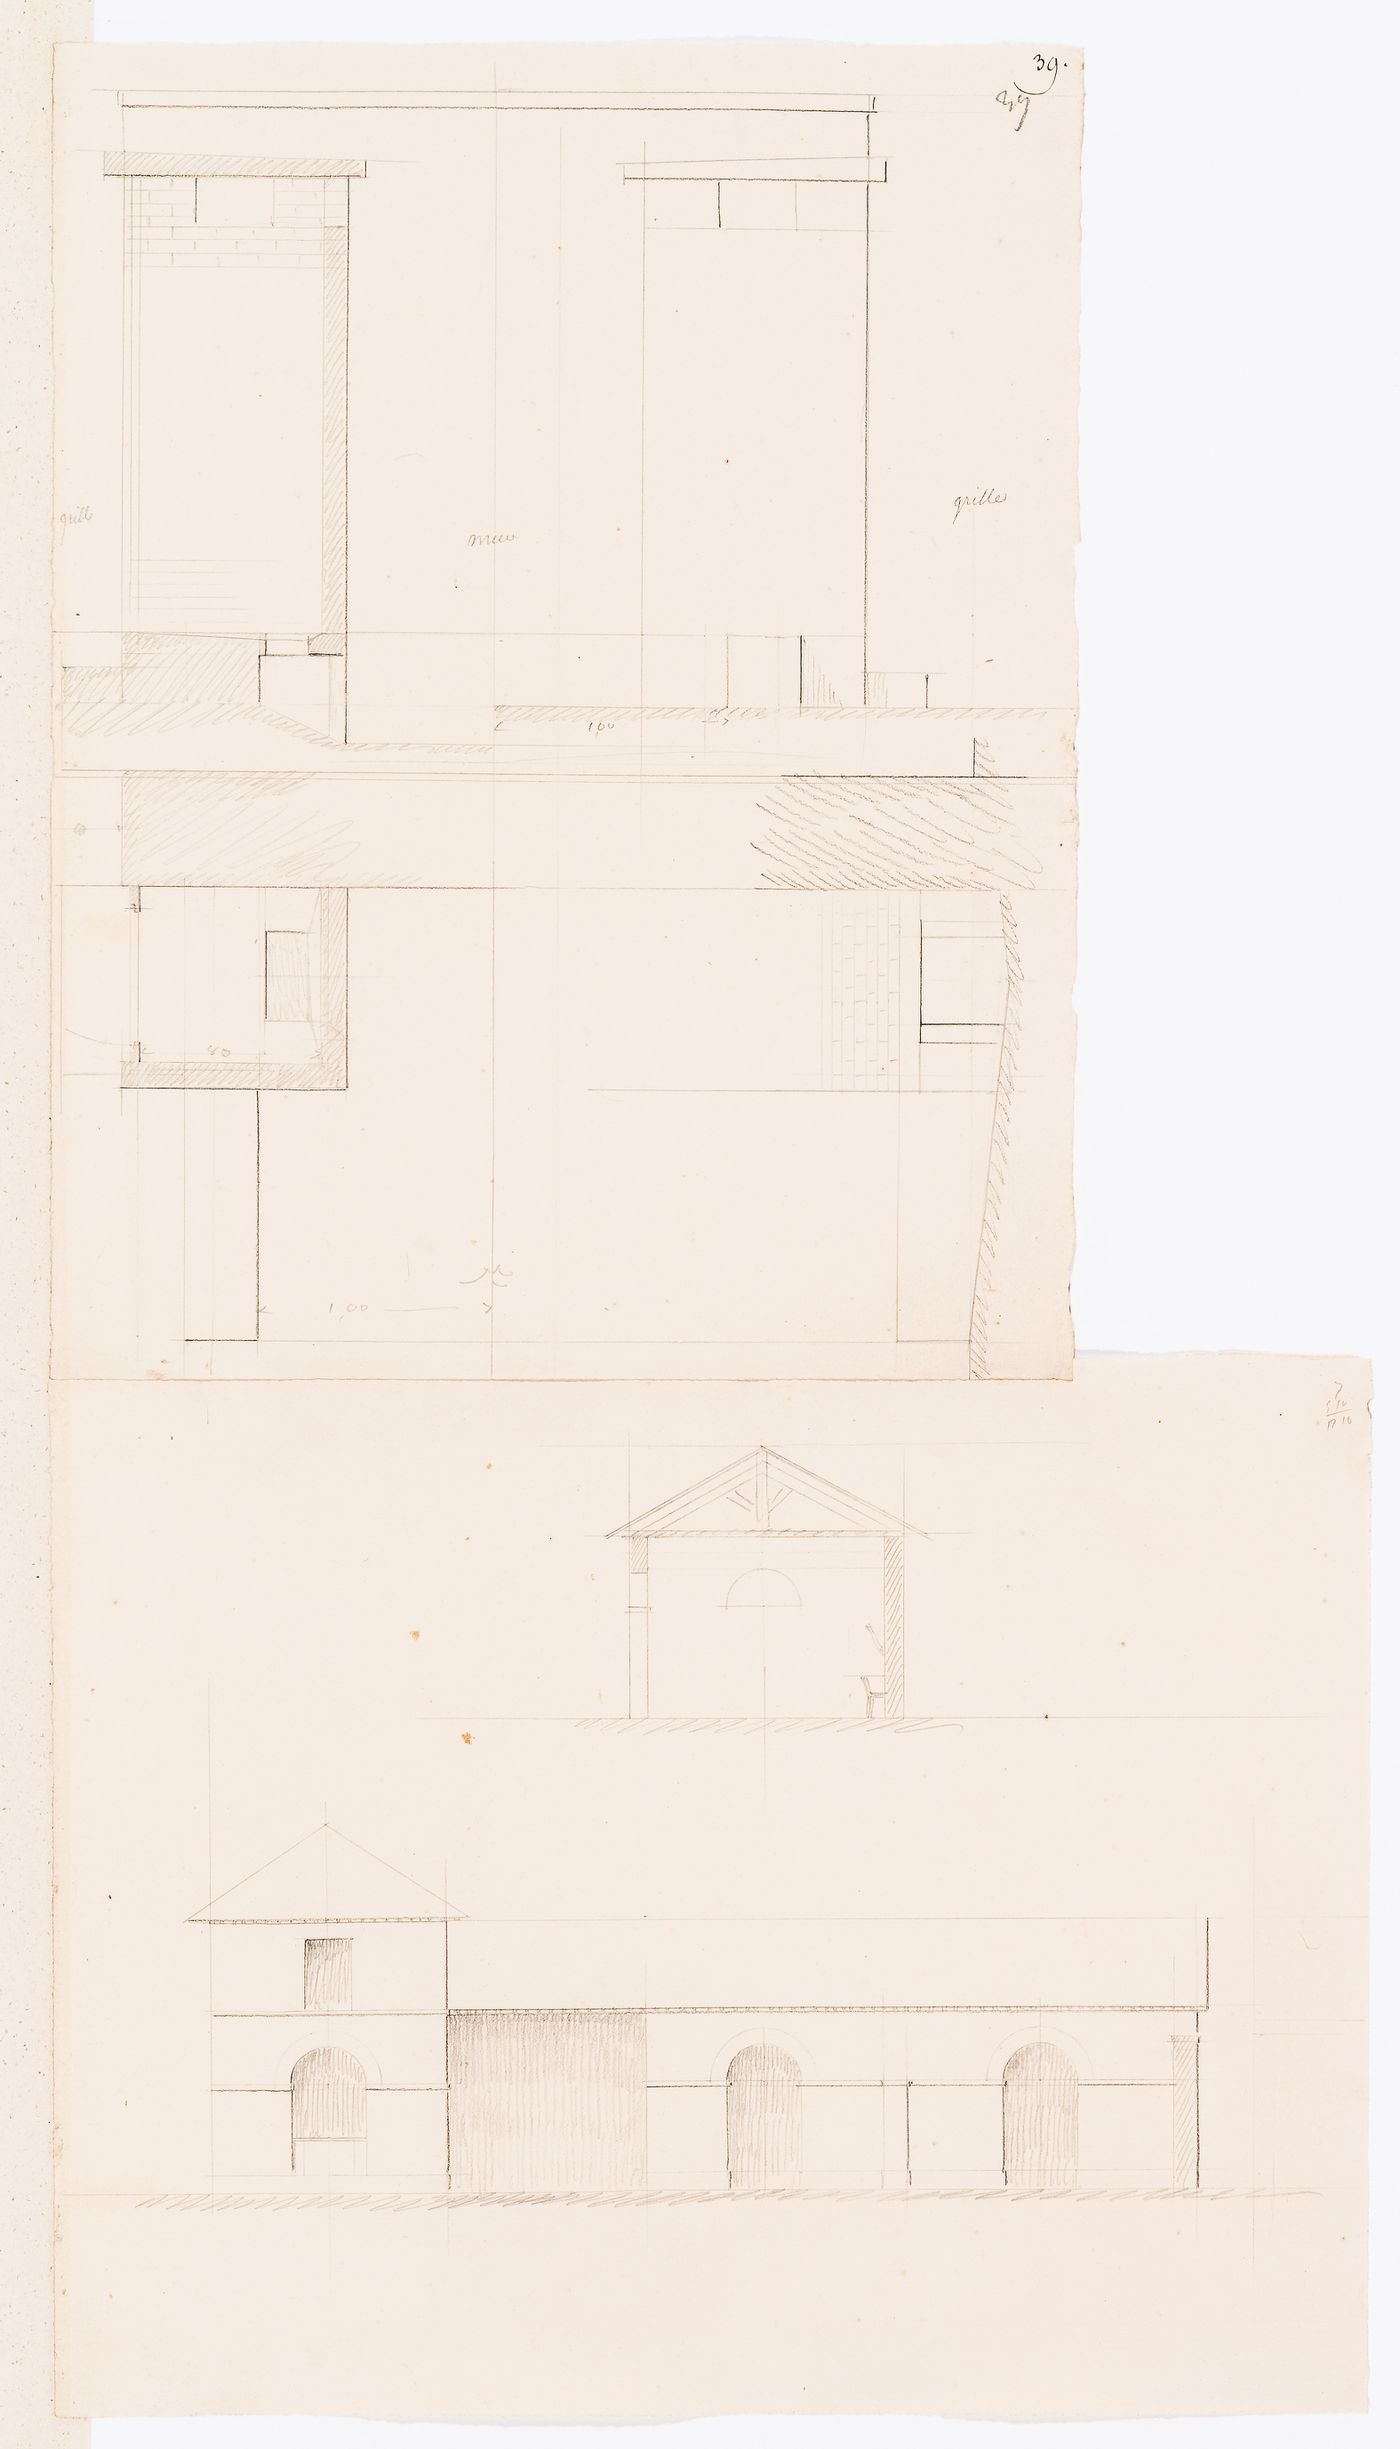 Project for a horse slaughterhouse, Plaine de Grenelle: Elevation and cross section for an unidentified building